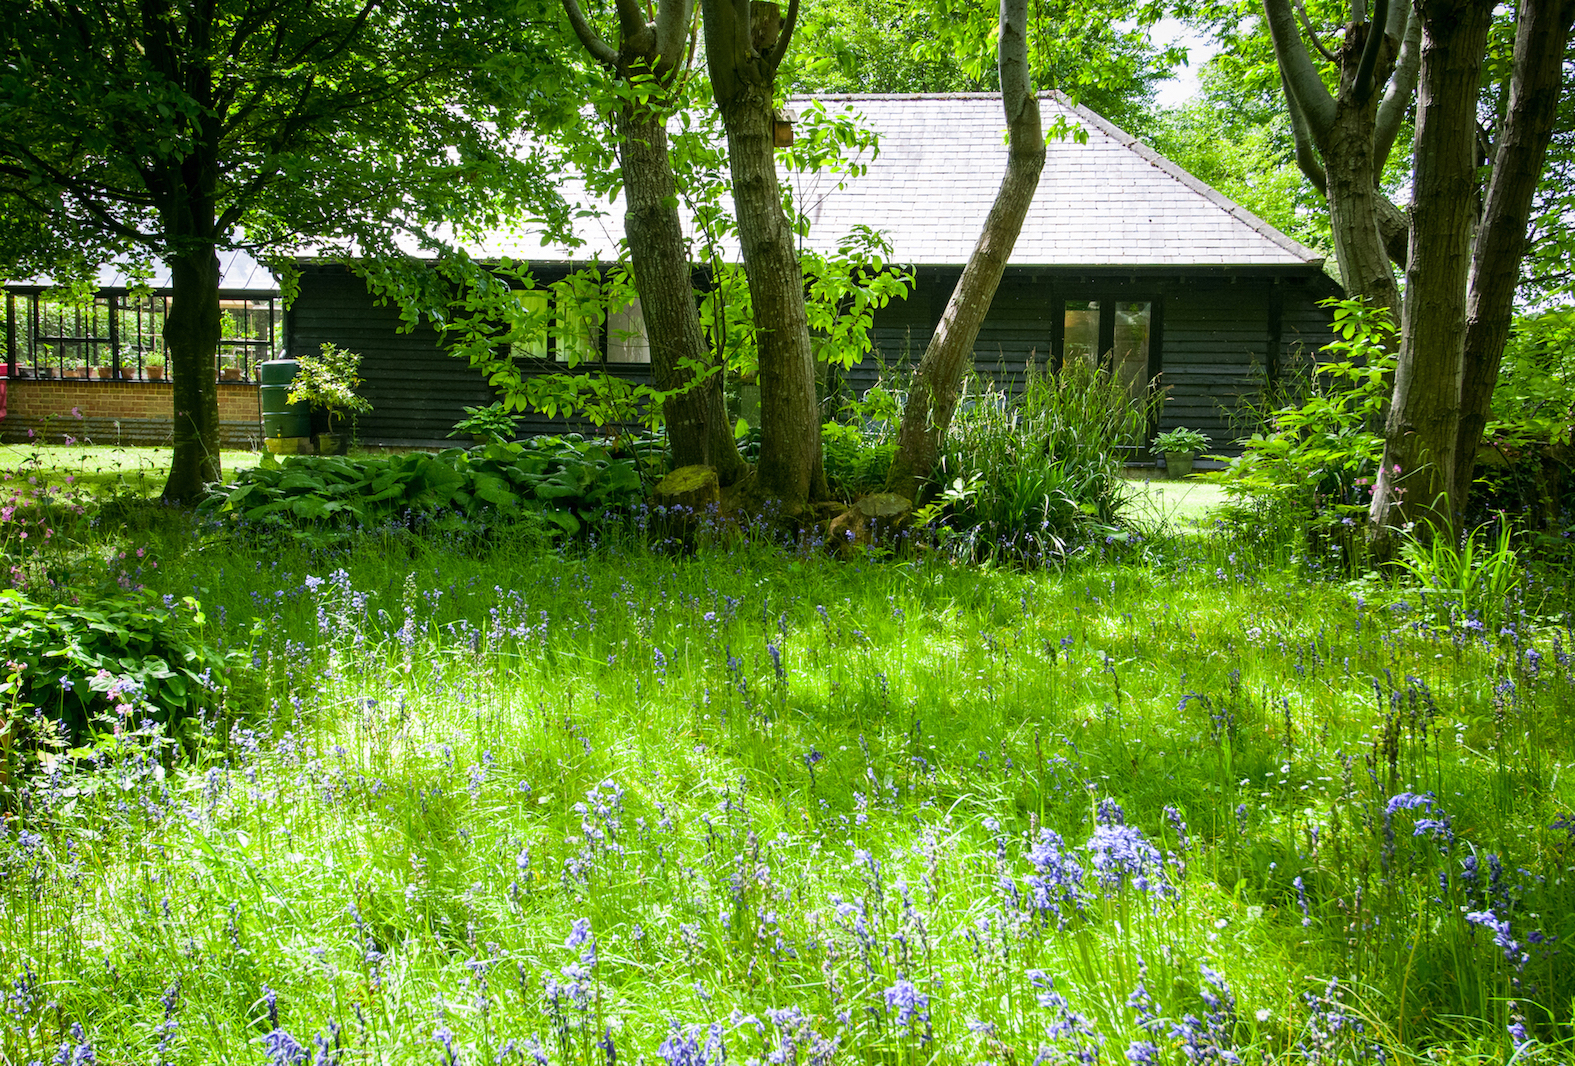 The view of the cottage from the bluebell woods, near Pewsey in Wiltshire